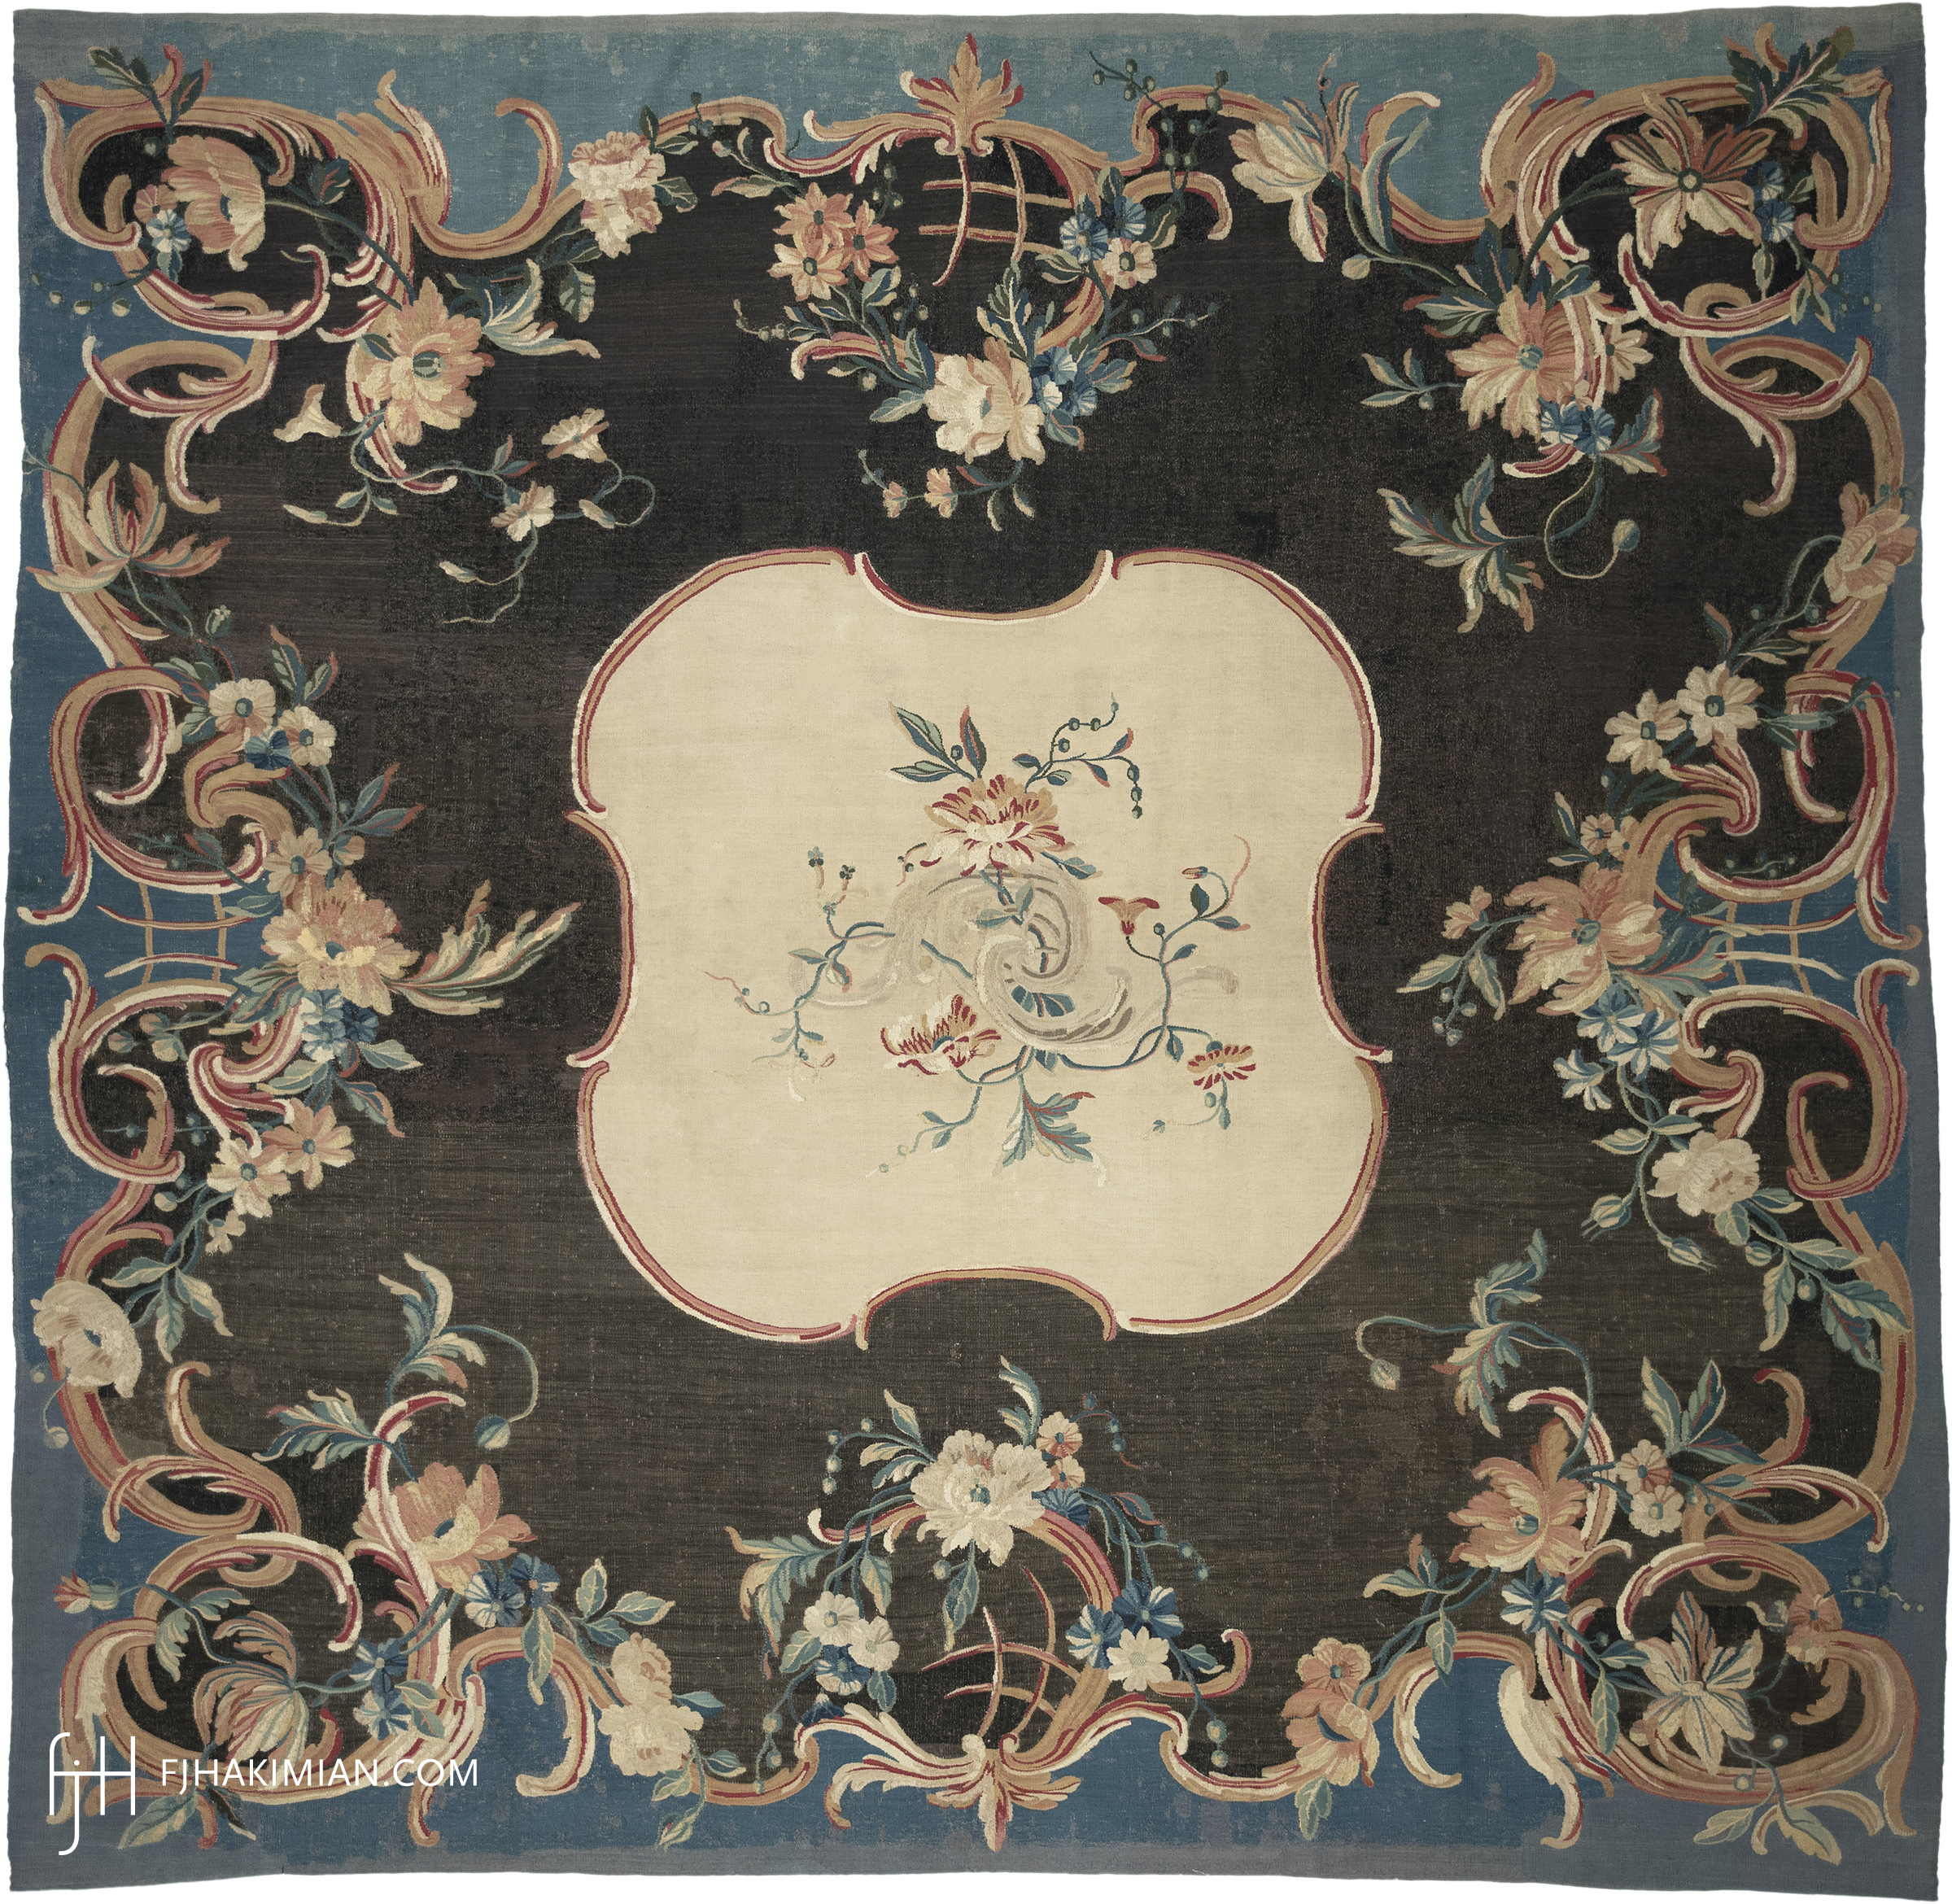 Antique Rugs | FJ Hakimian | Carpet Gallery in NYC